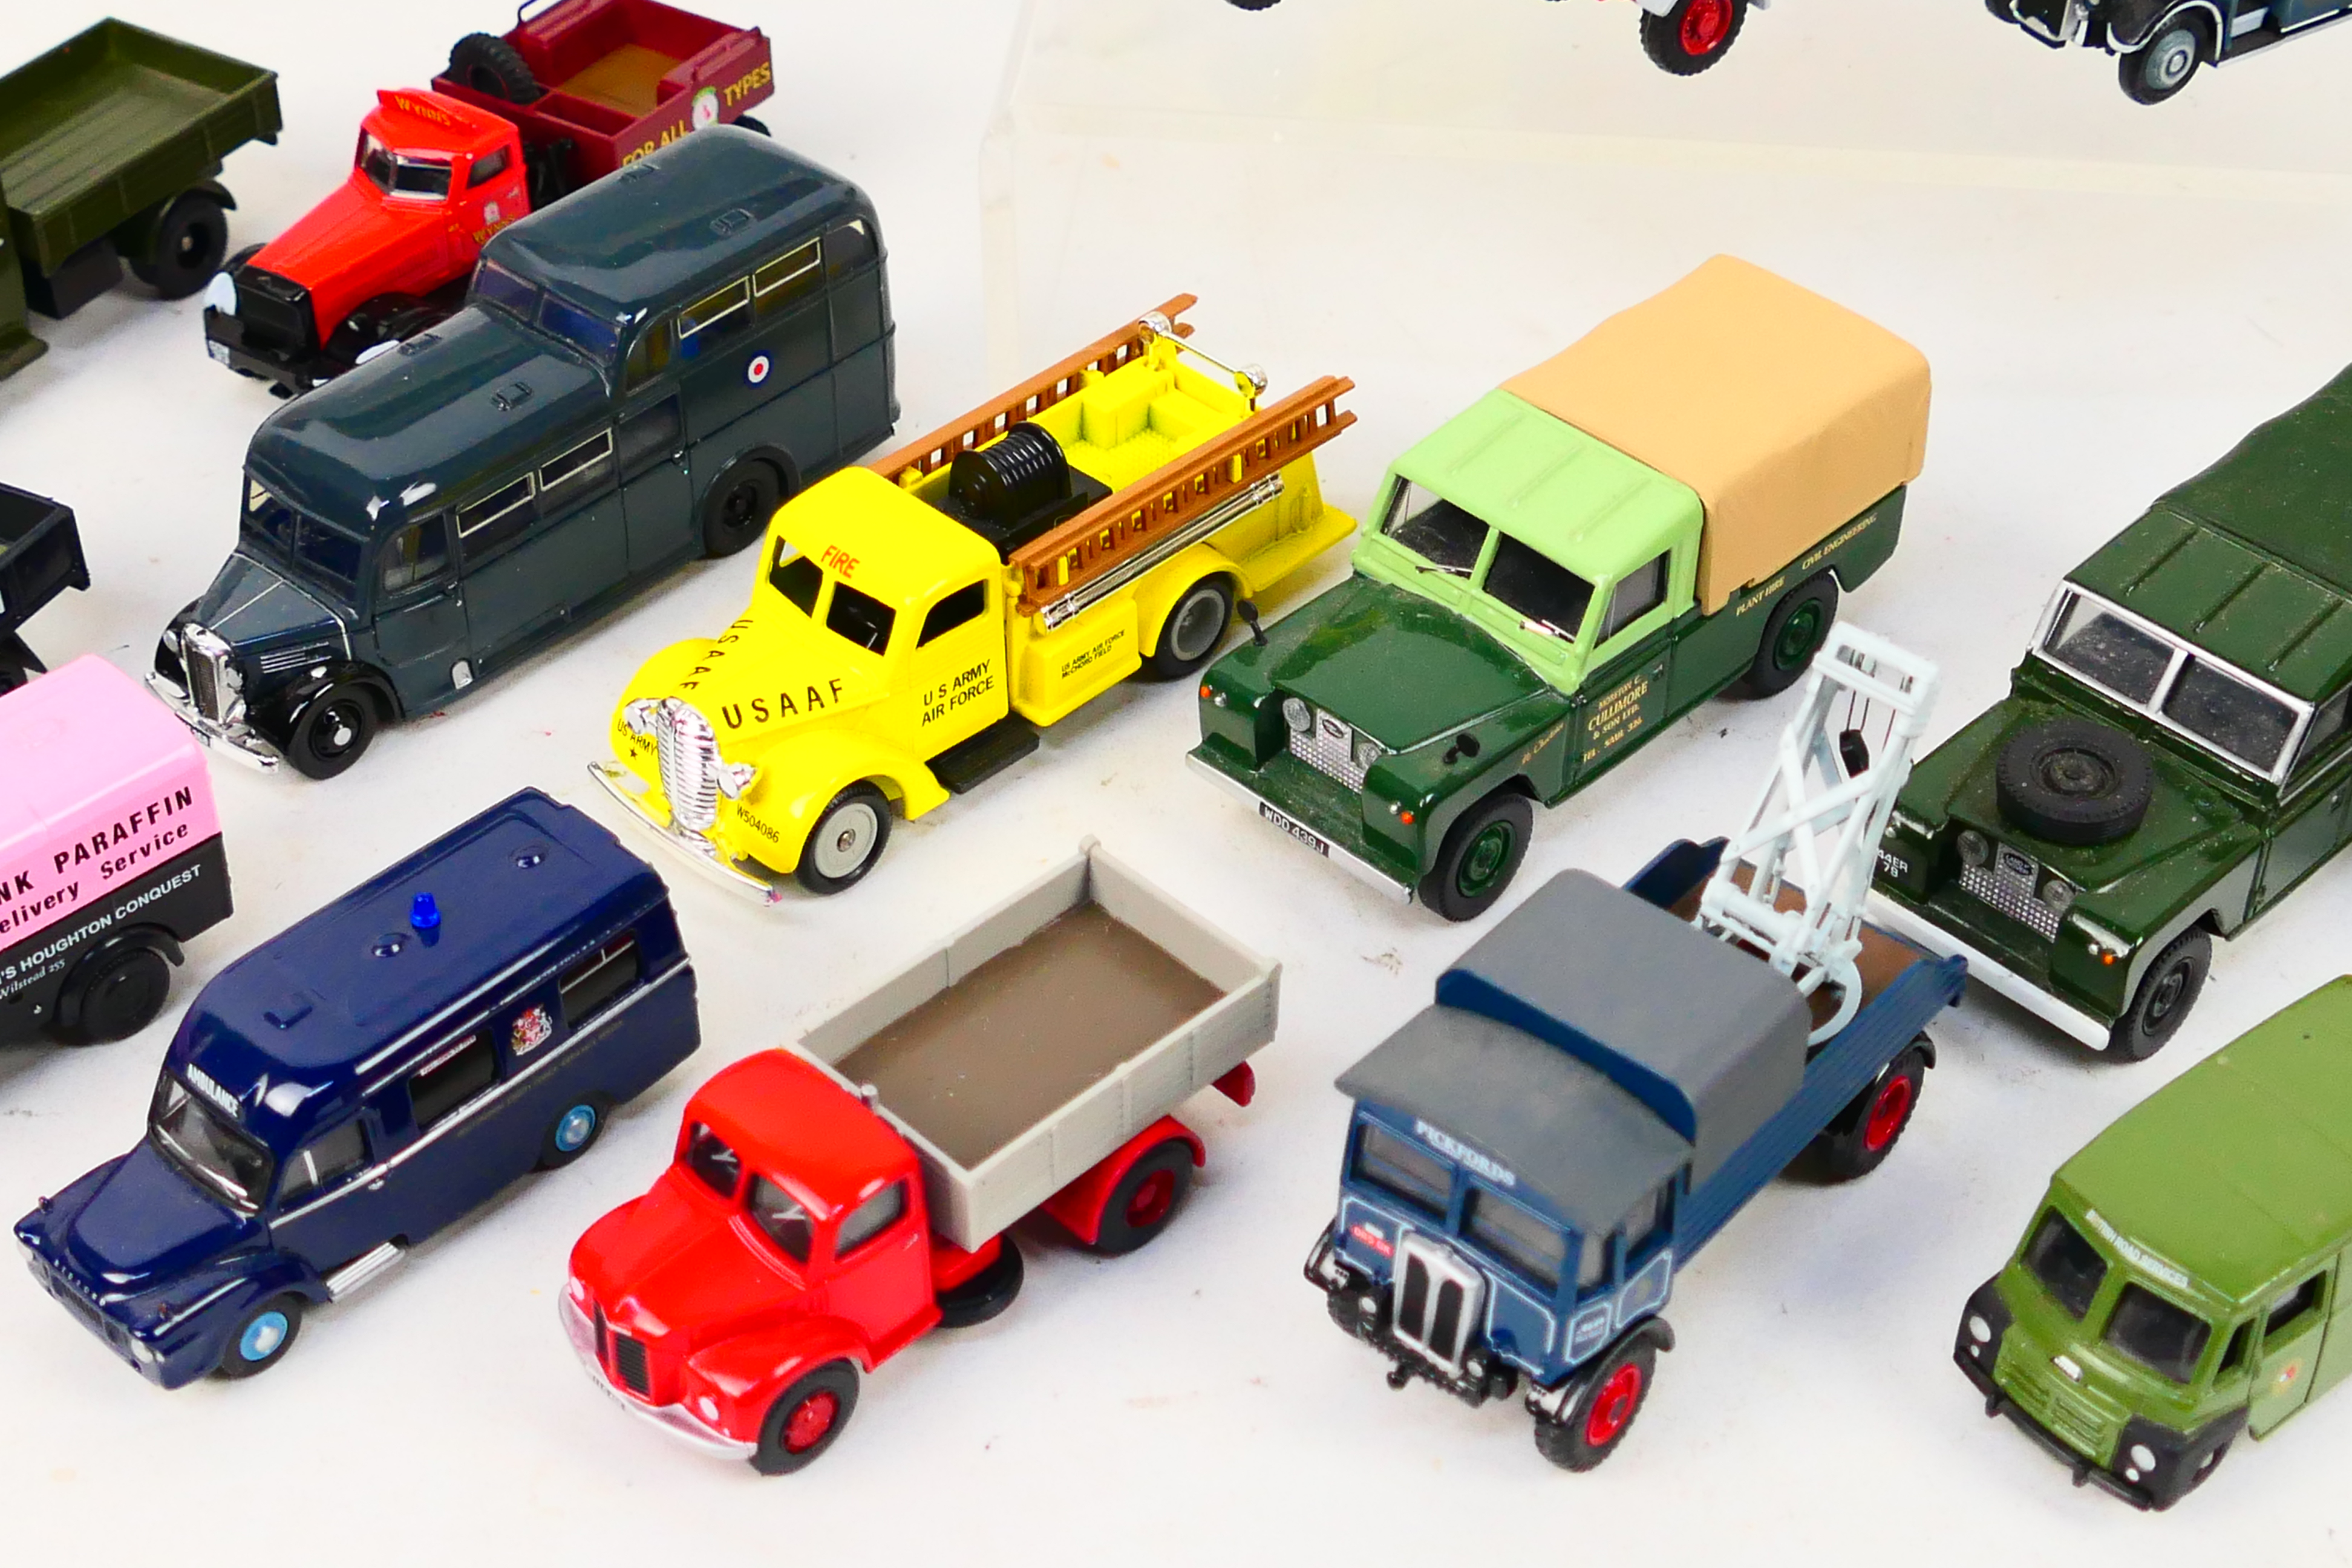 Oxford Diecast - Classix - Corgi - Lledo - Approximately 30 diecast model vehicles in various - Image 5 of 6